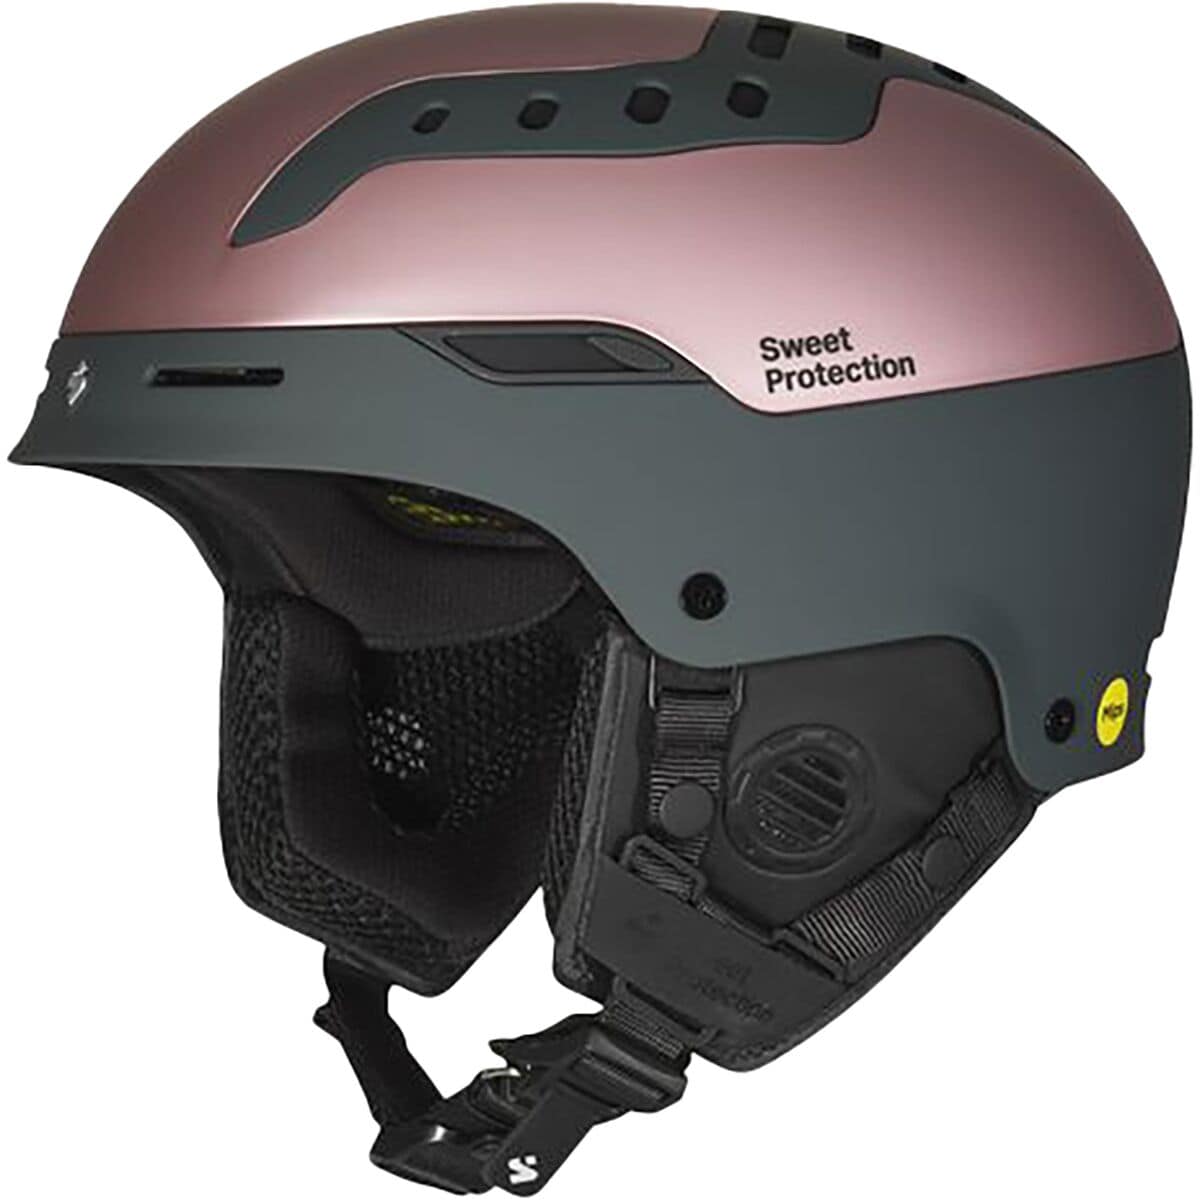 Sweet Protection Switcher Mips Helmet Matte Rose Gold